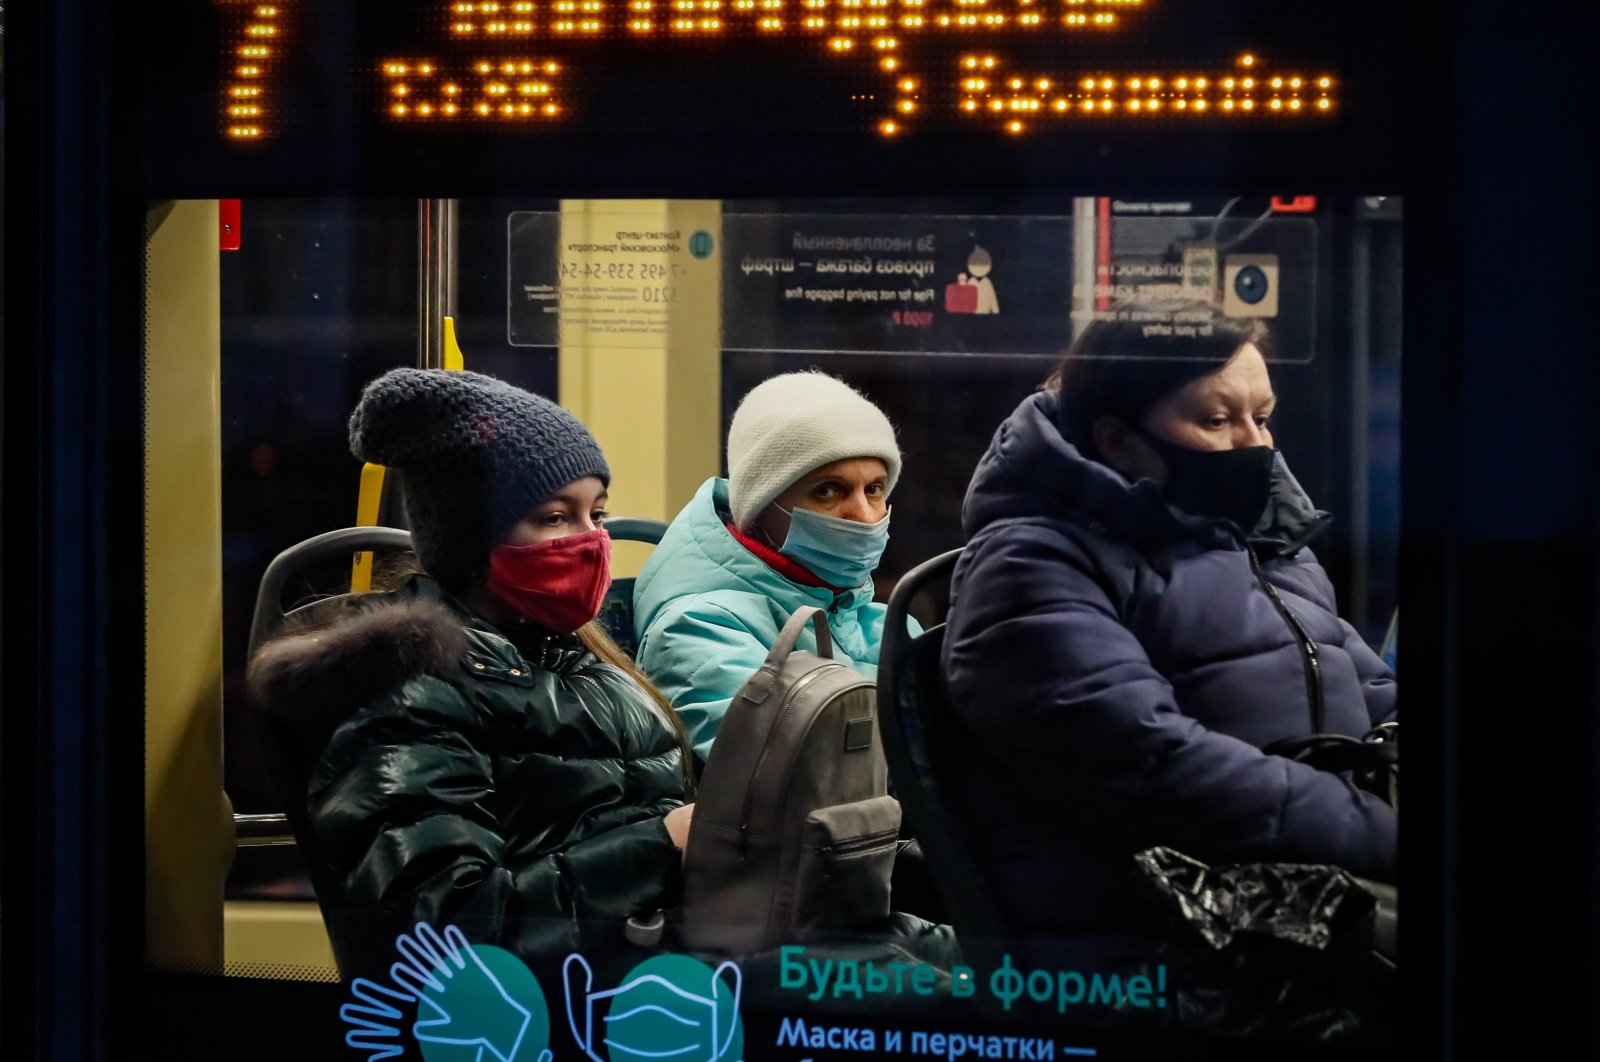 People wearing protective face masks ride on public transport during the coronavirus pandemic in Moscow, Russia, Nov. 27, 2020. (EPA Photo)